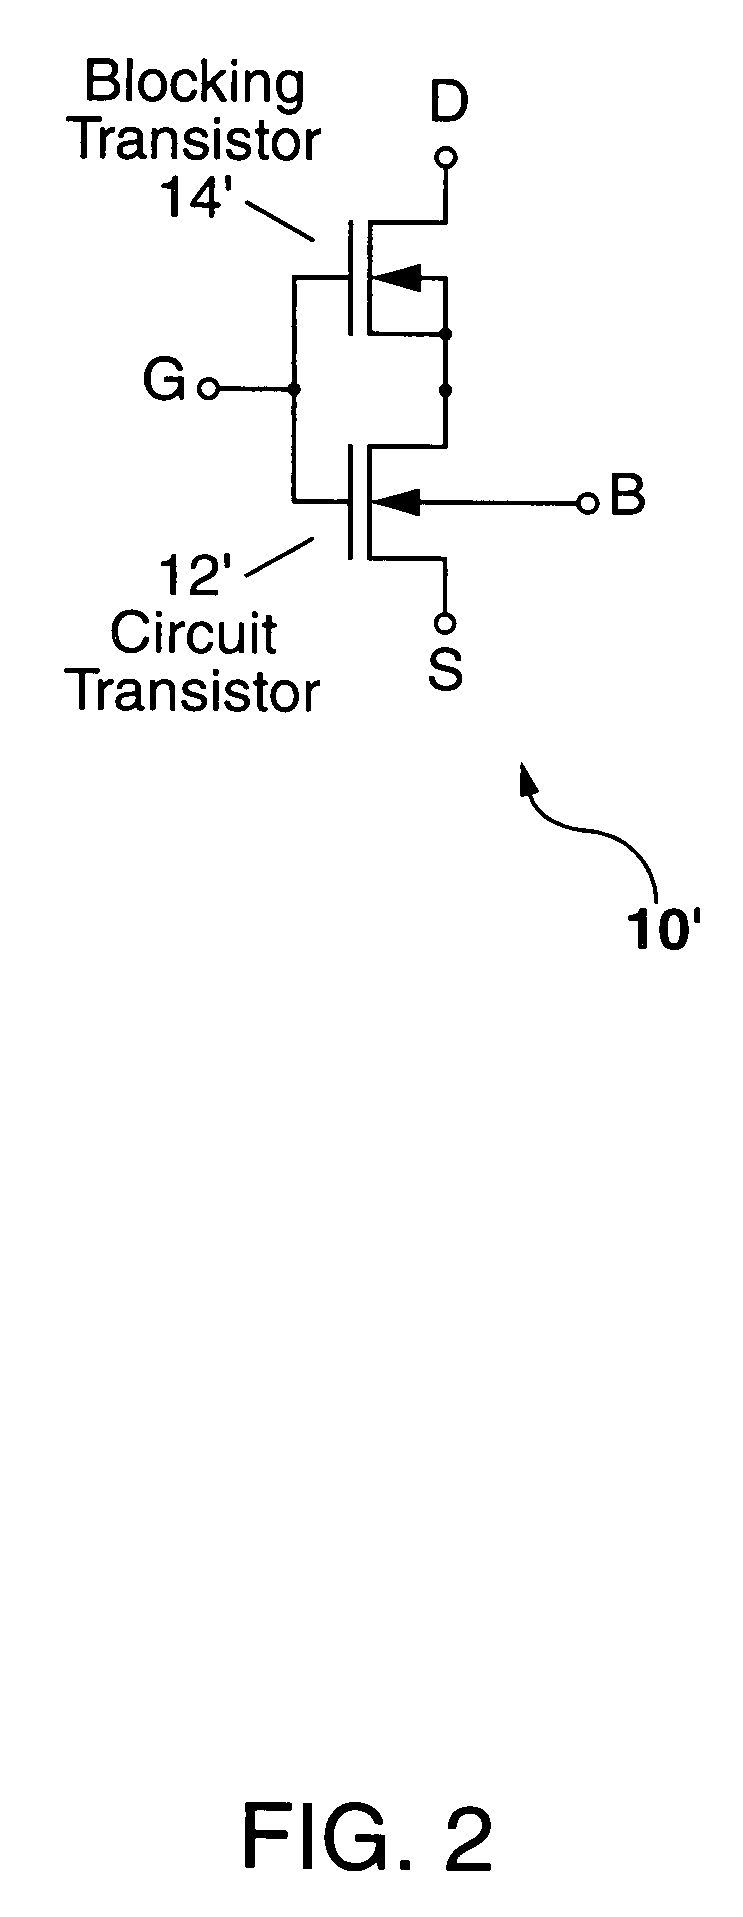 Radiation-hardened transistor and integrated circuit